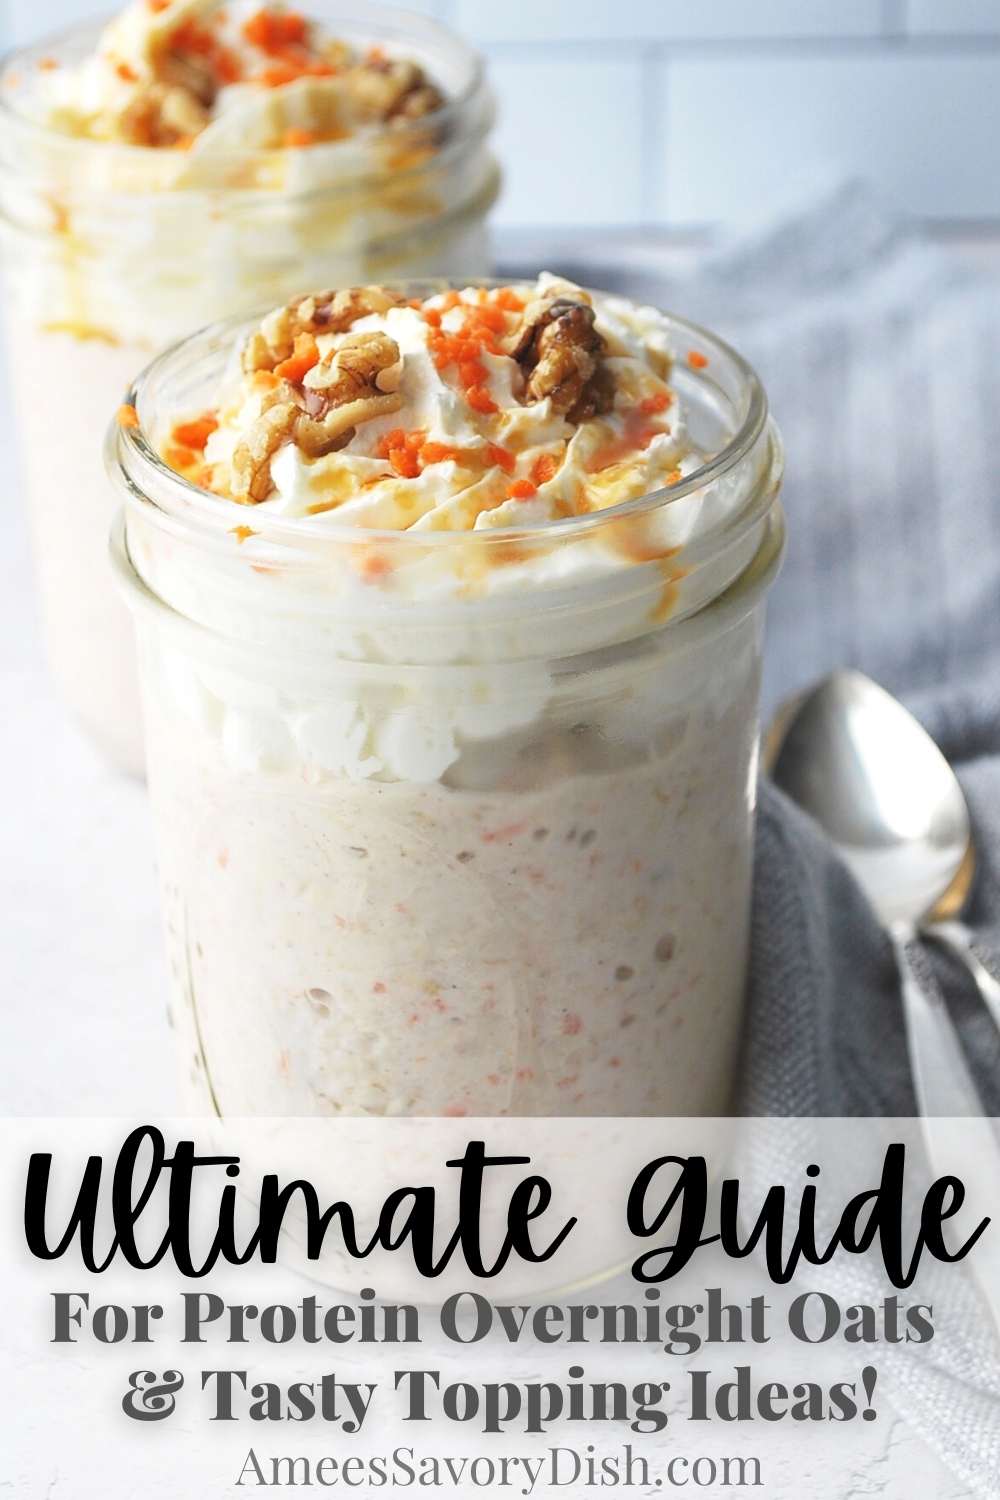 An easy recipe for high protein overnight oats with two options for making with Greek yogurt or protein powder with a variety of toppings including carrot-cake-inspired ingredients. via @Ameessavorydish